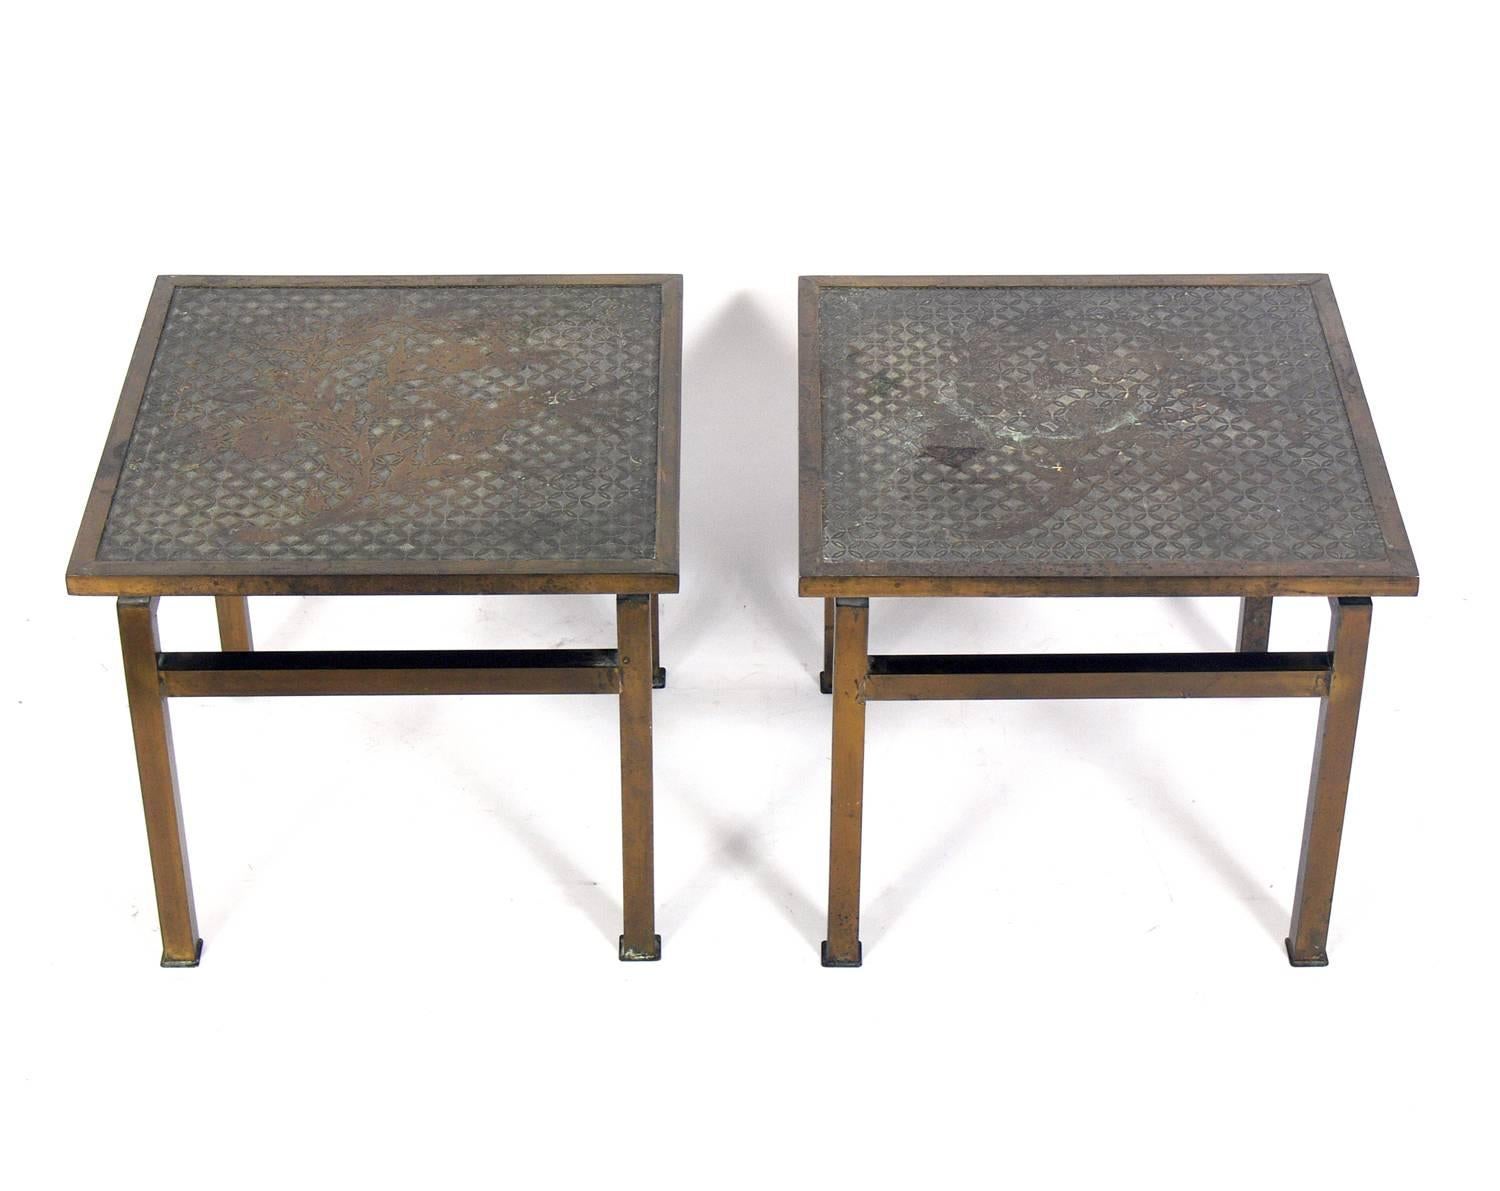 Pair of bronze side tables by Philip and Kelvin LaVerne, American, circa 1960s. They retain their warm original patina. They are versatile size and can be used as end or side tables, or as nightstands.